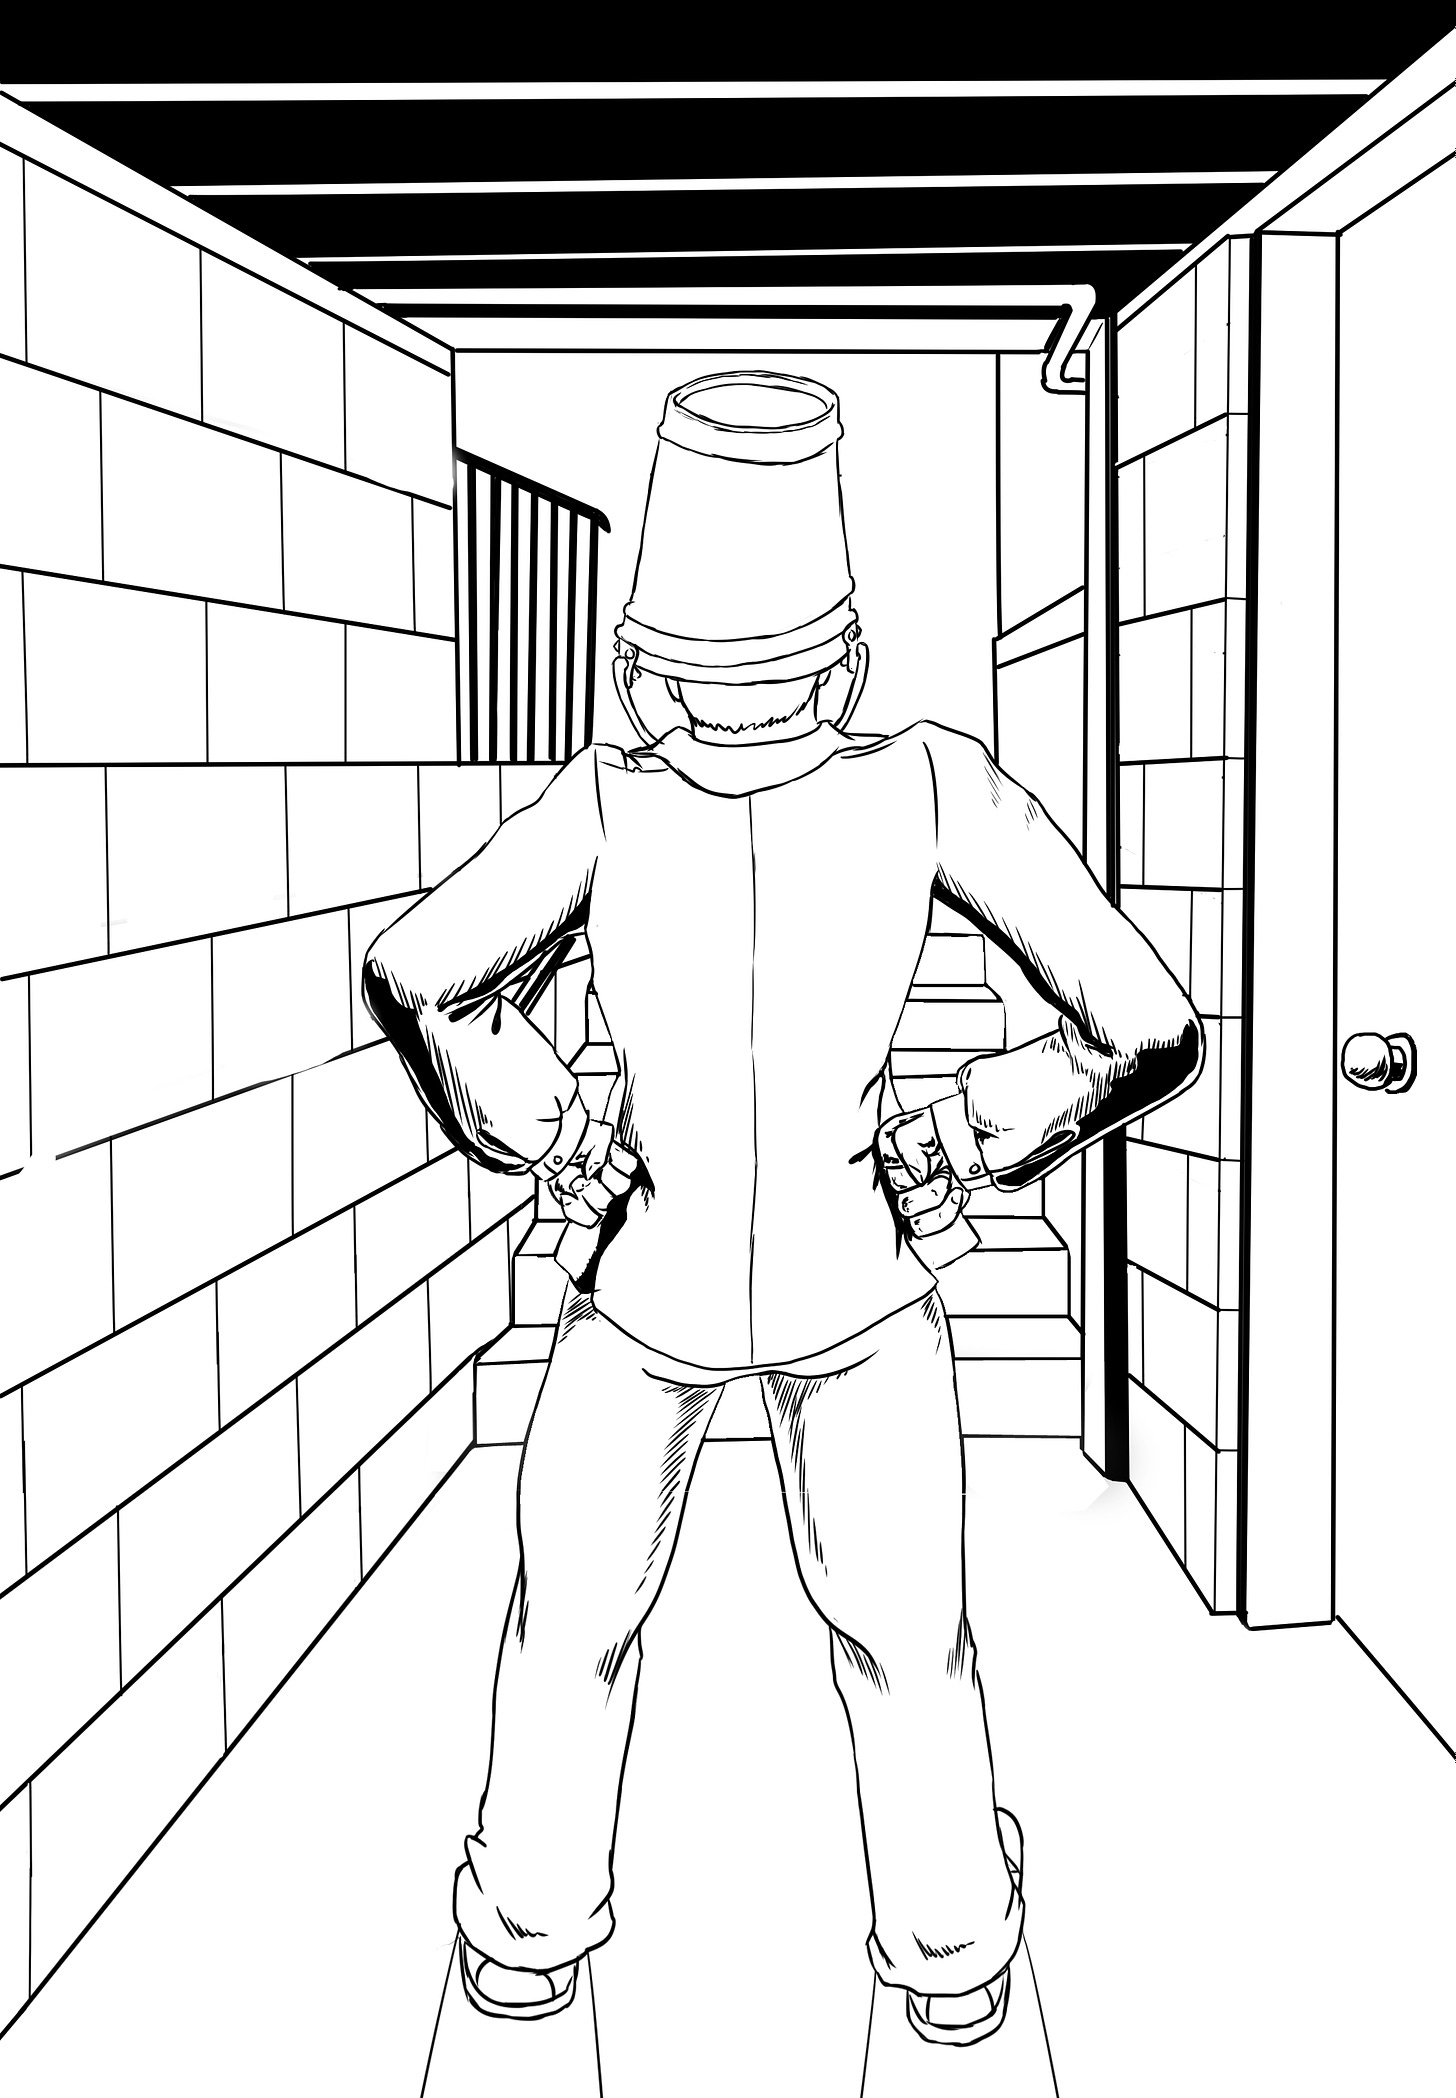 The final moments of Buckethead Issue 0 and the Buckethead comic trailer.